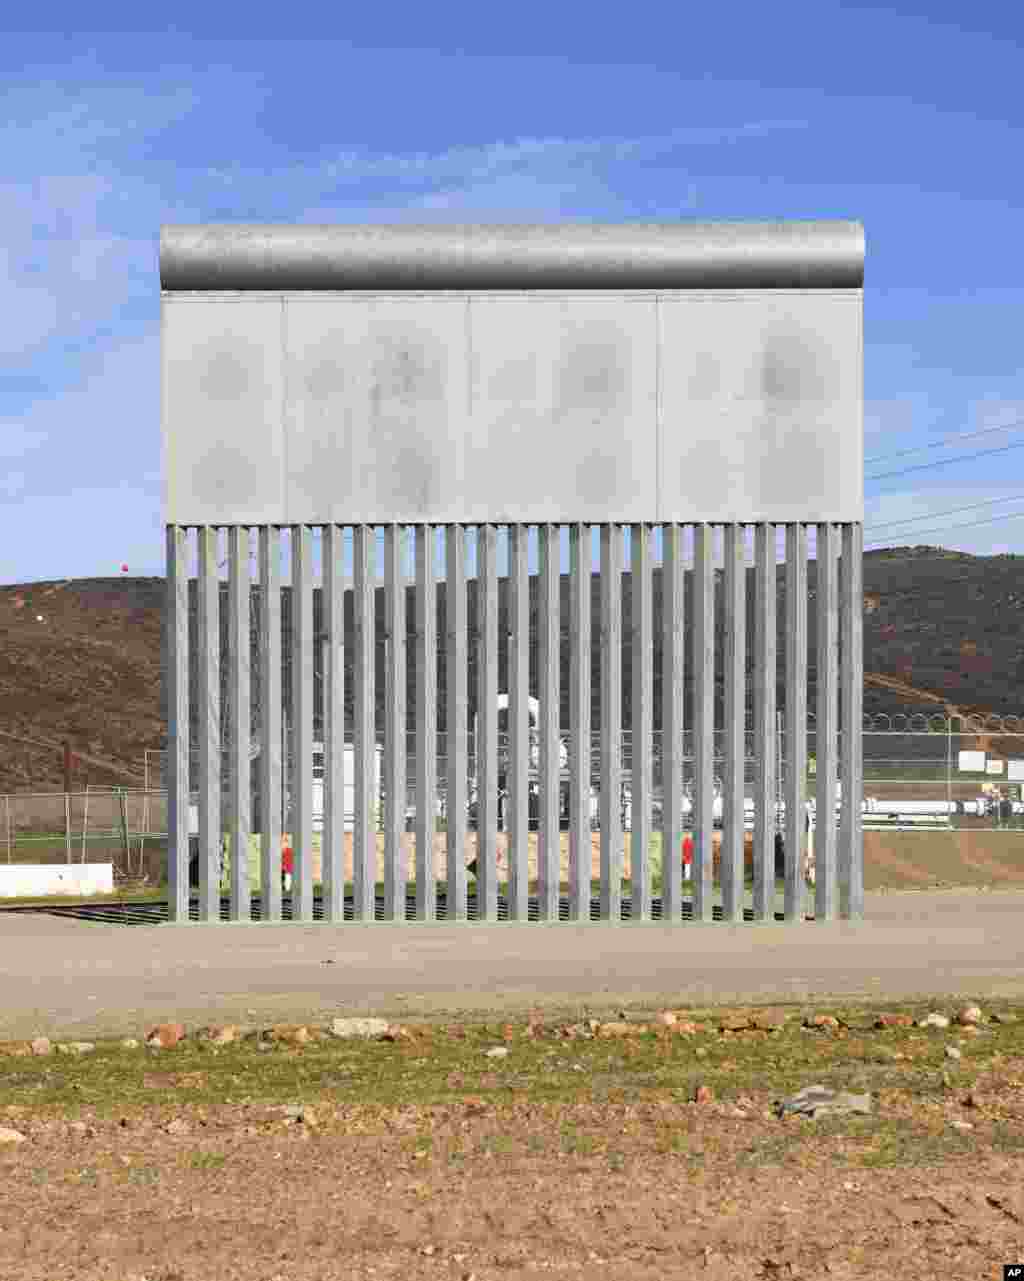 A border wall prototype stands in San Diego near the Mexico-U.S. border, seen from Tijuana, Mexico, Dec. 22, 2018. 